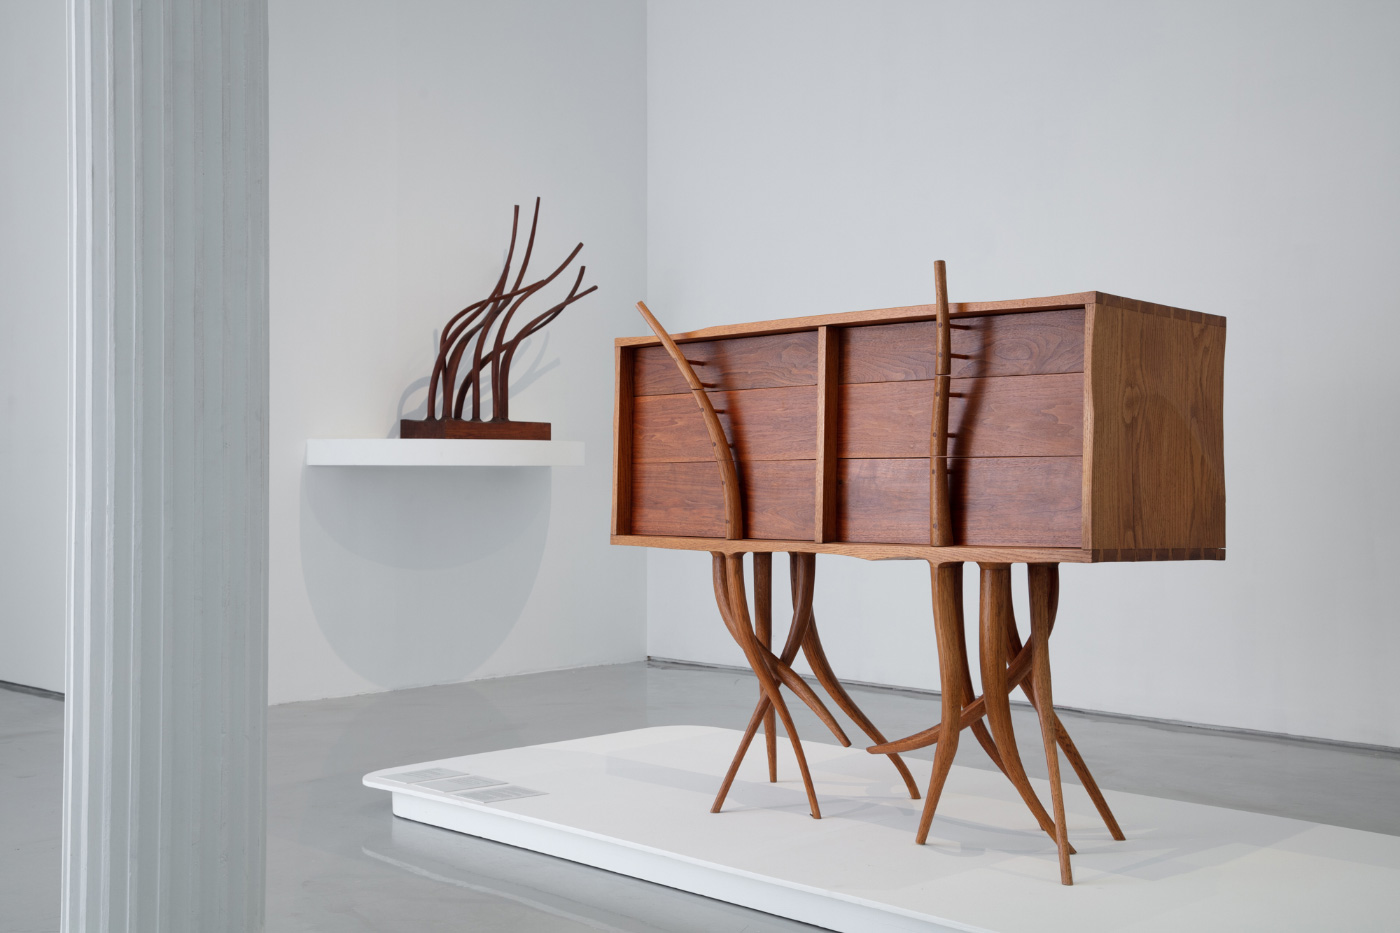 A Wendell Castle-designed dresser with branches for legs